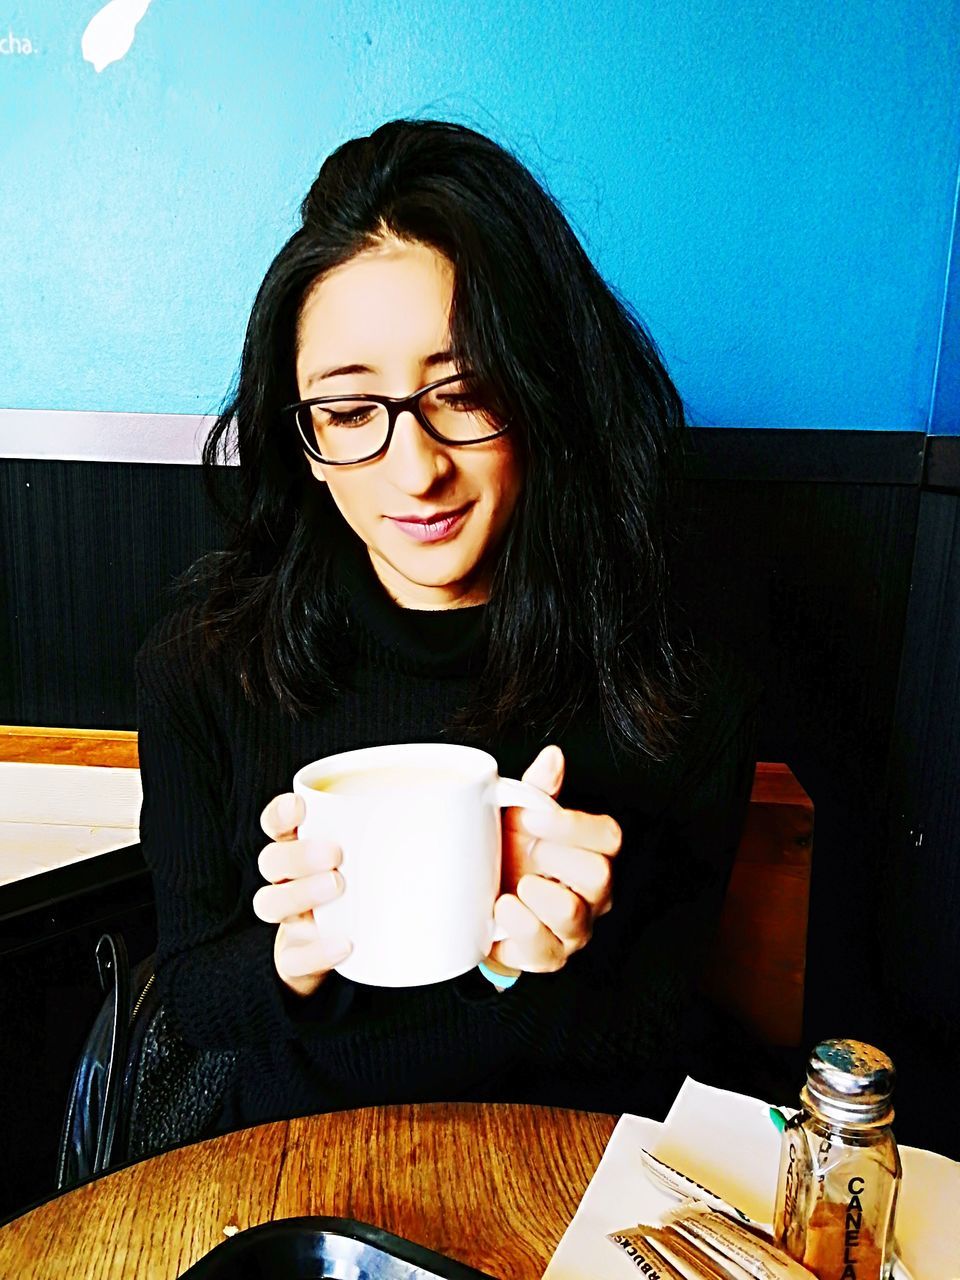 YOUNG WOMAN SITTING WITH COFFEE